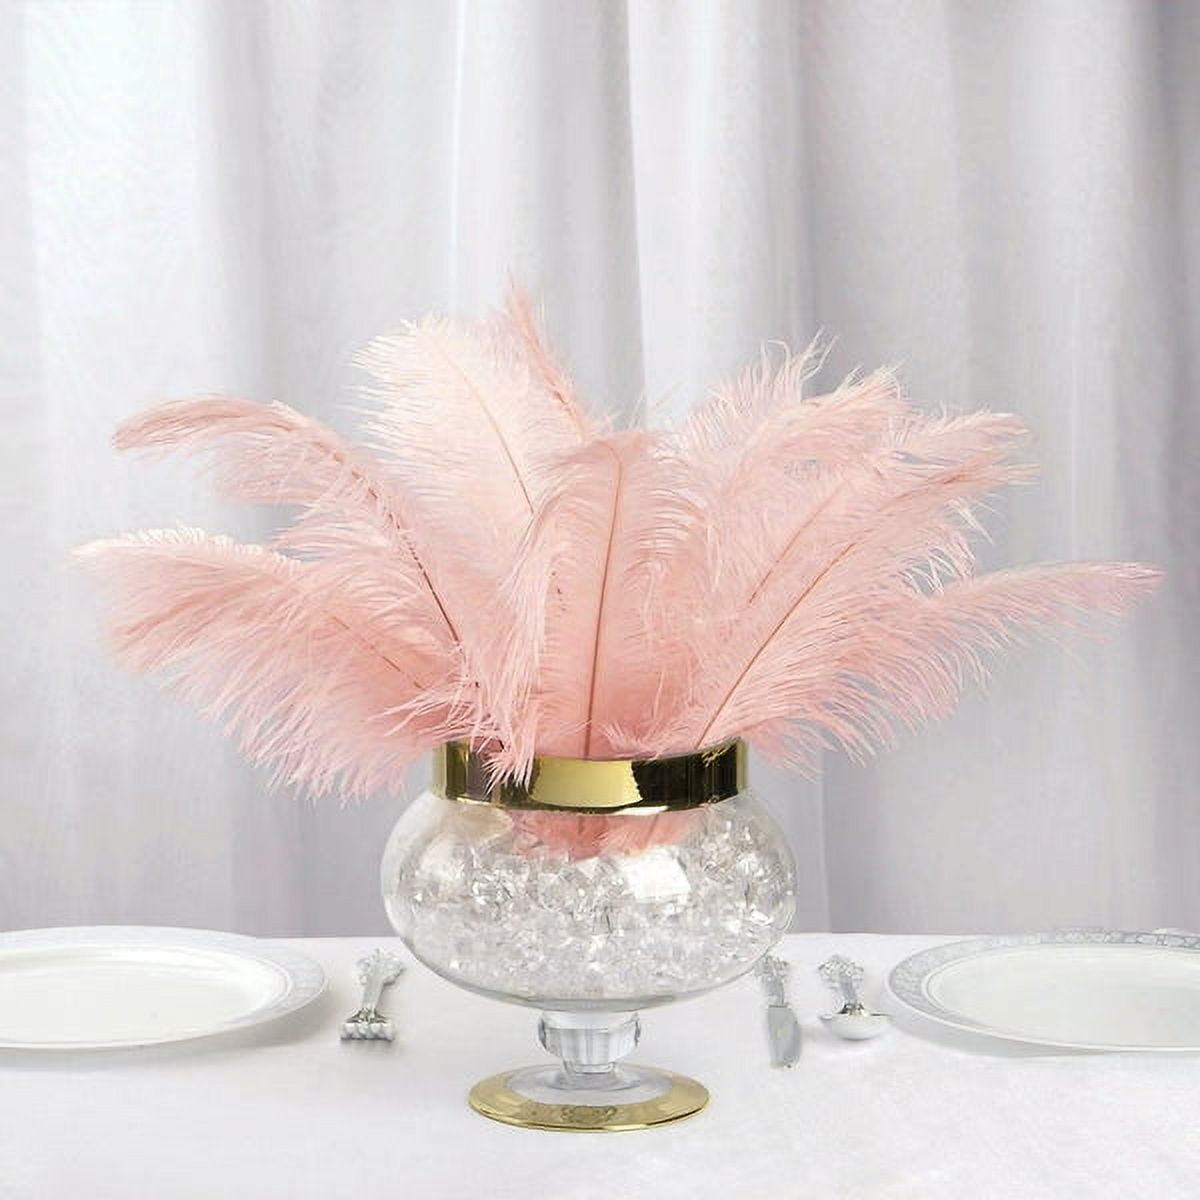 Rose Ostrich Feather Decor 15-70cm 6-28 Ostrich Feathers Crafts DIY Vases  Party Table Centerpieces Carnival Wedding Decoration